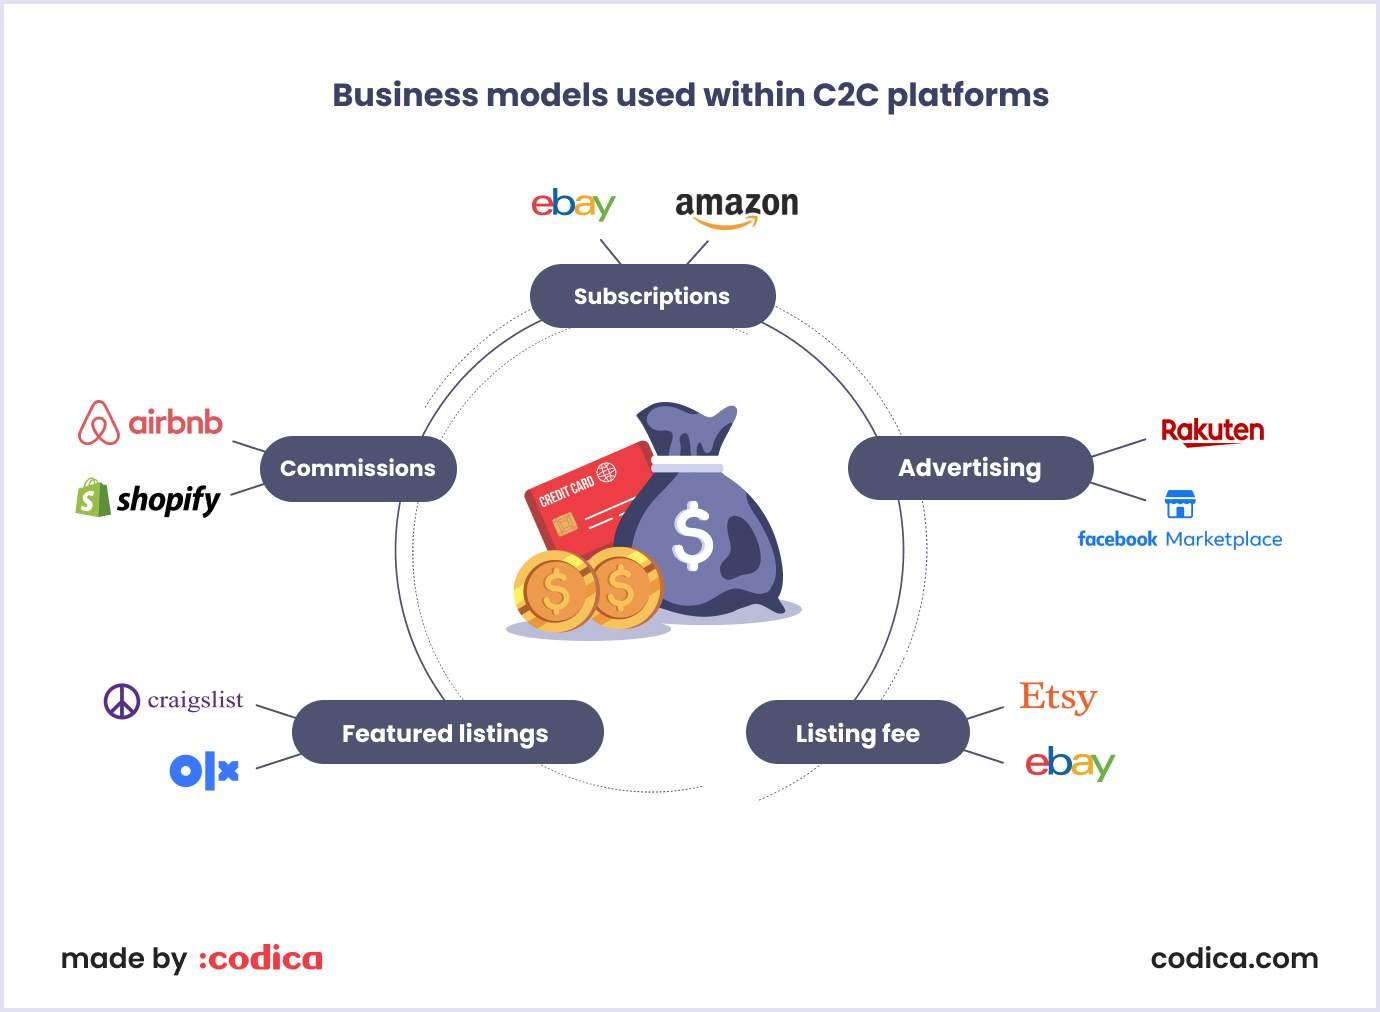 Business models used within C2C platforms